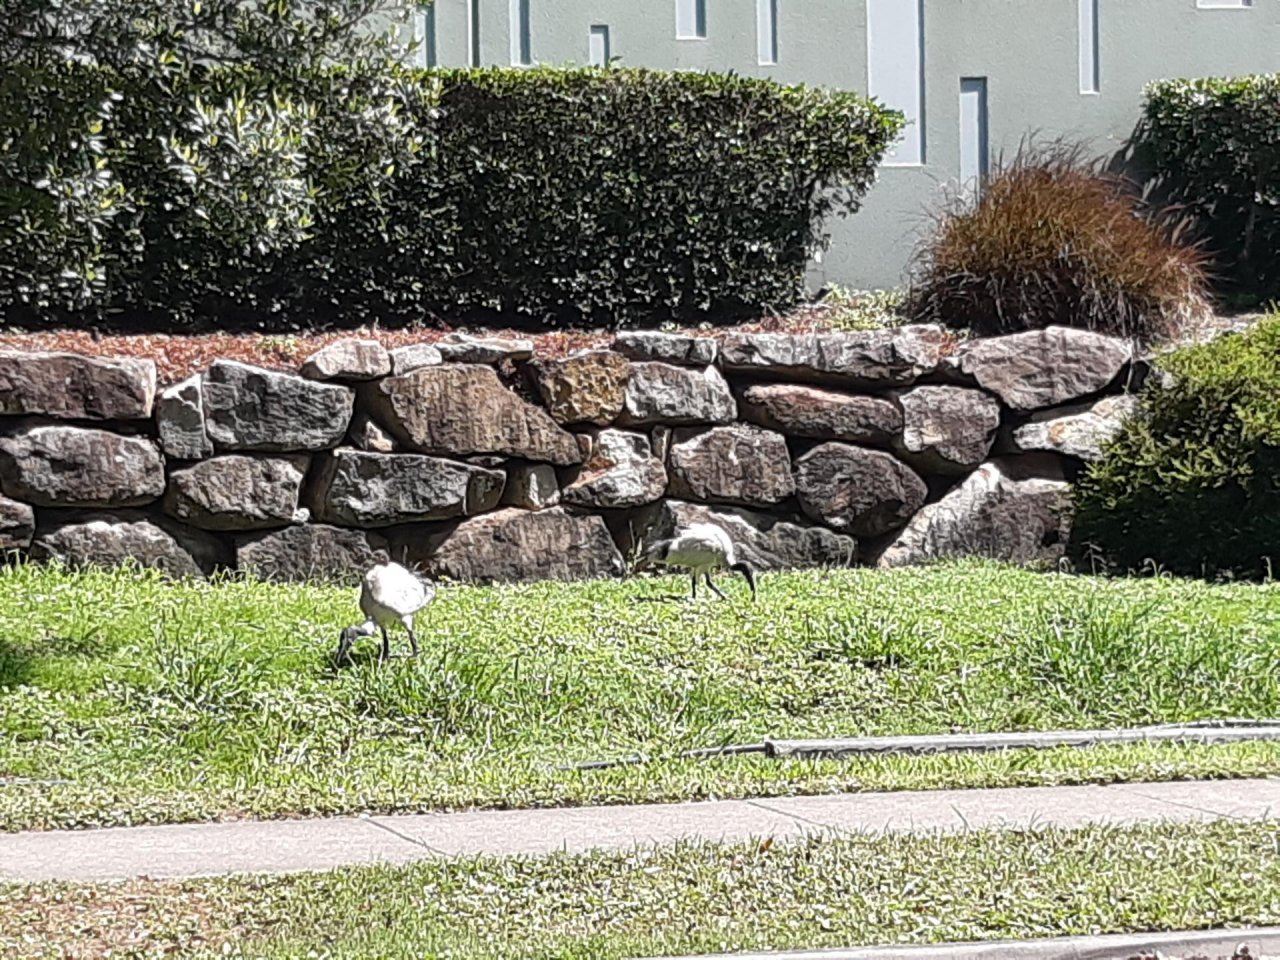 White Ibis in Big City Birds App spotted by Feather on 23.12.2020